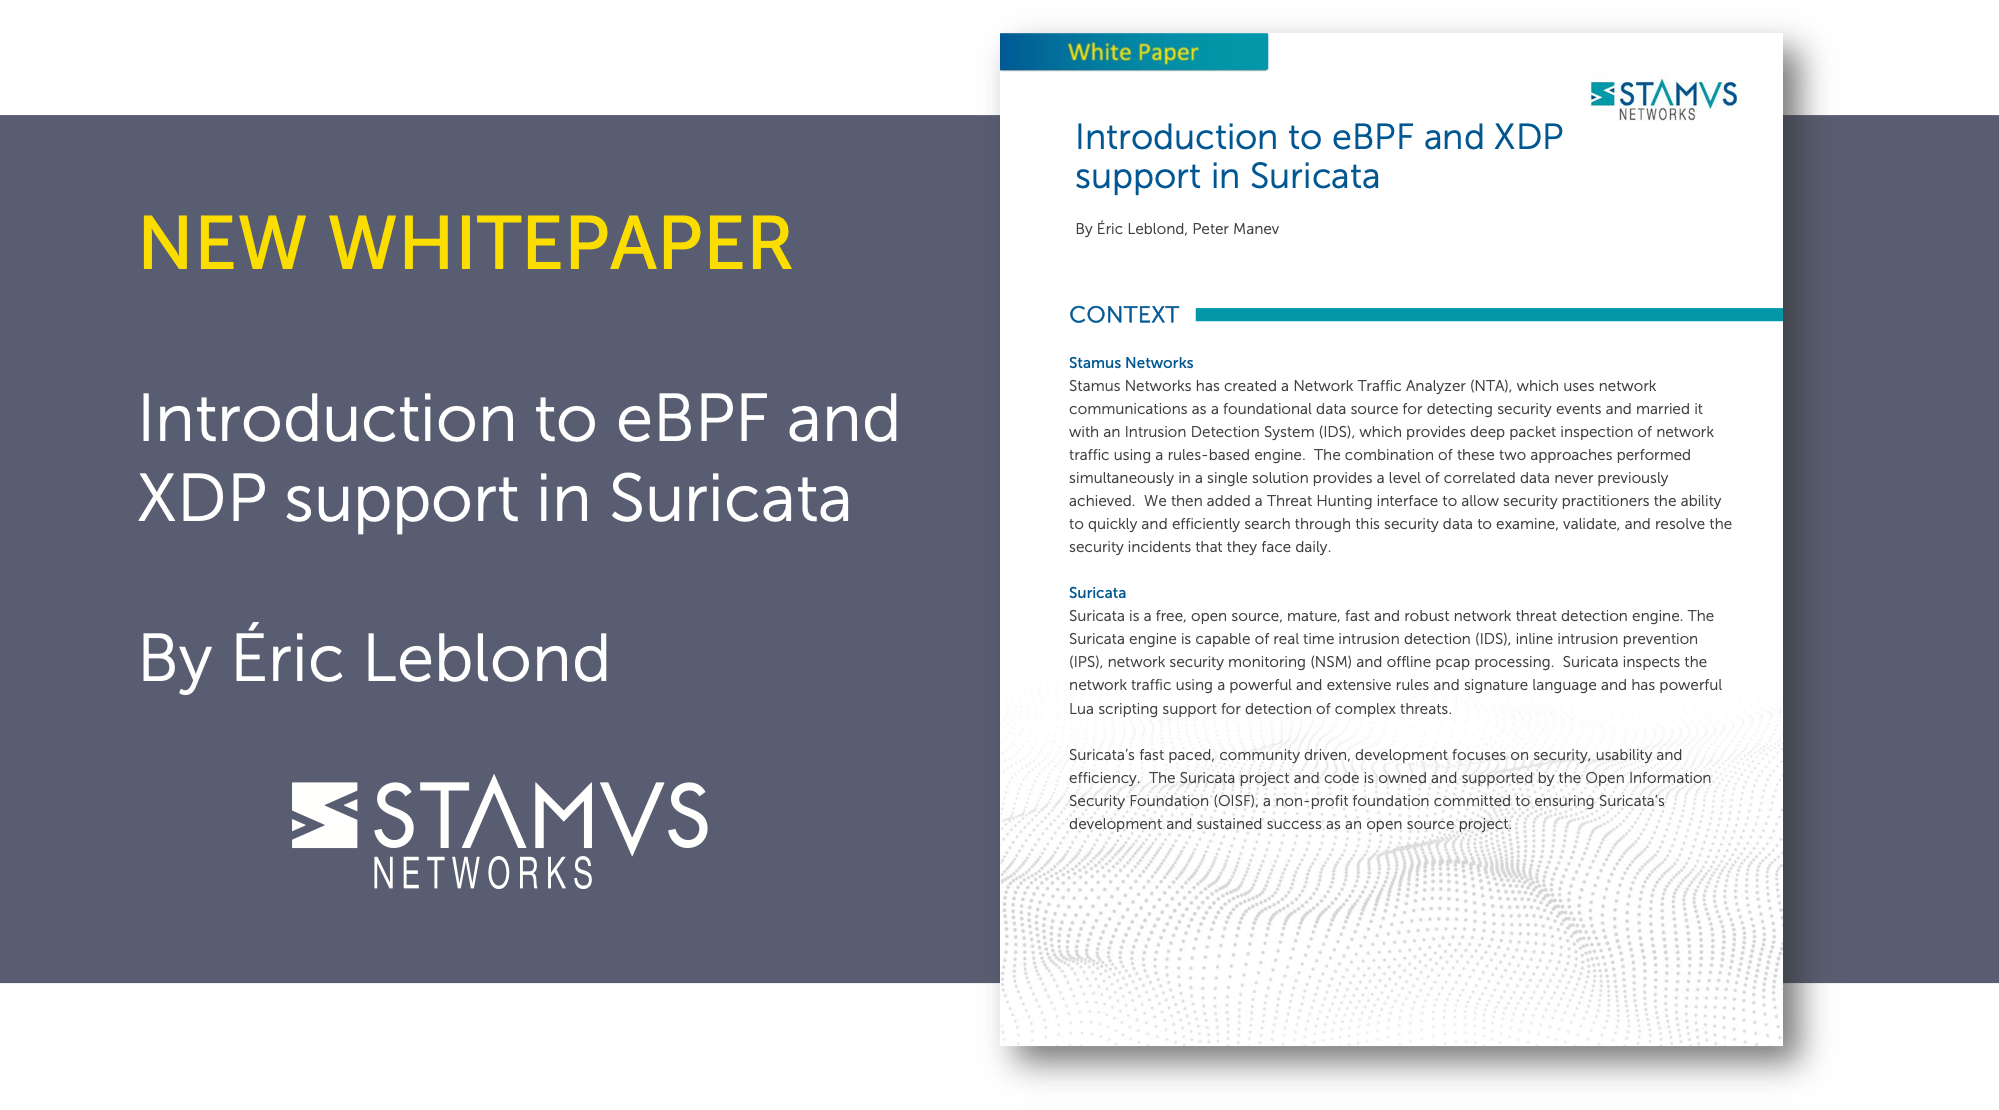 eBPF and XDP support is one of the latest evolutions of the Suricata engine’s performance capabilities. These two technologies have been introduced 